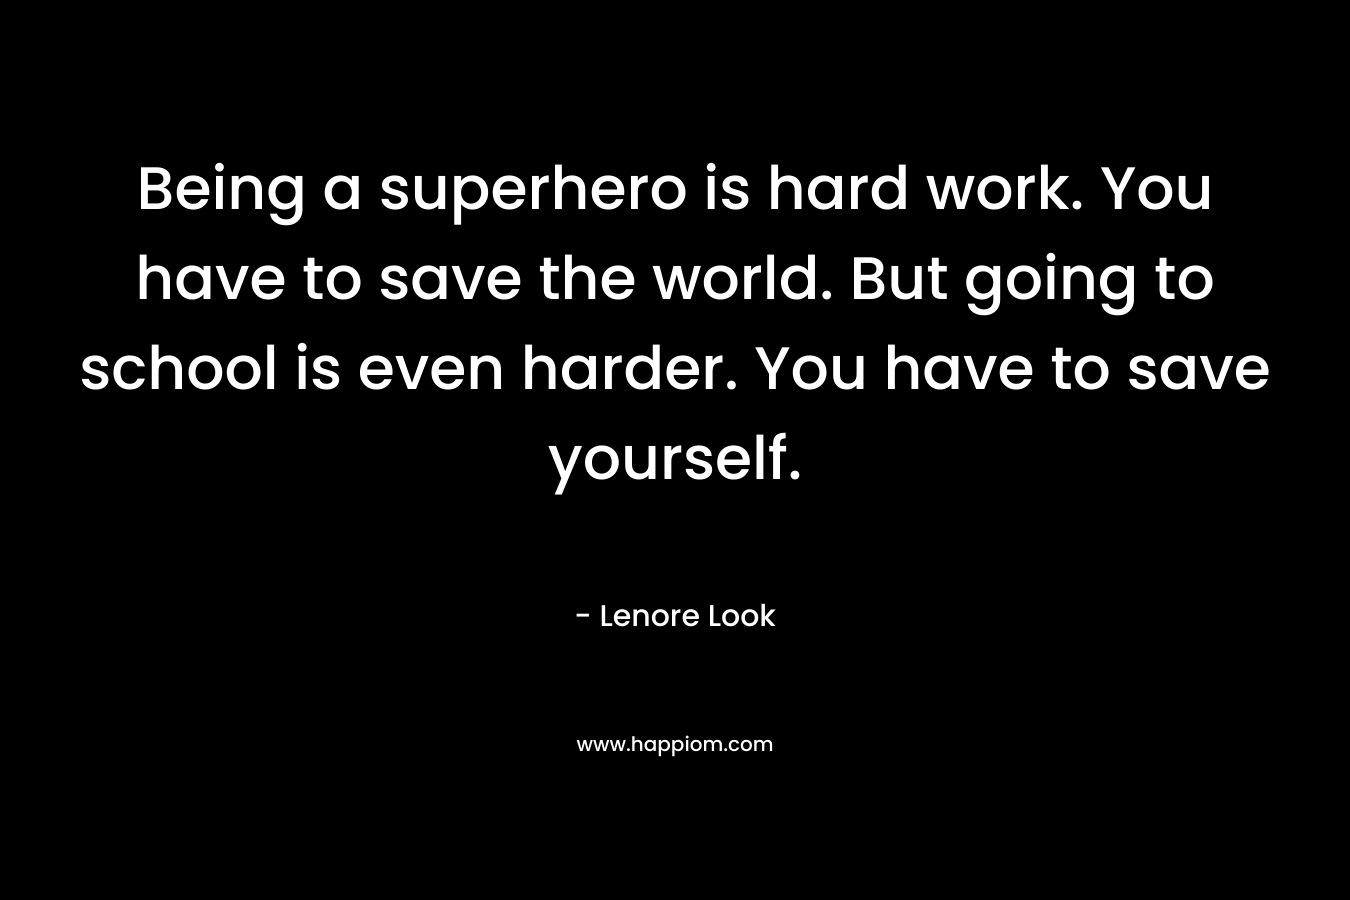 Being a superhero is hard work. You have to save the world. But going to school is even harder. You have to save yourself.